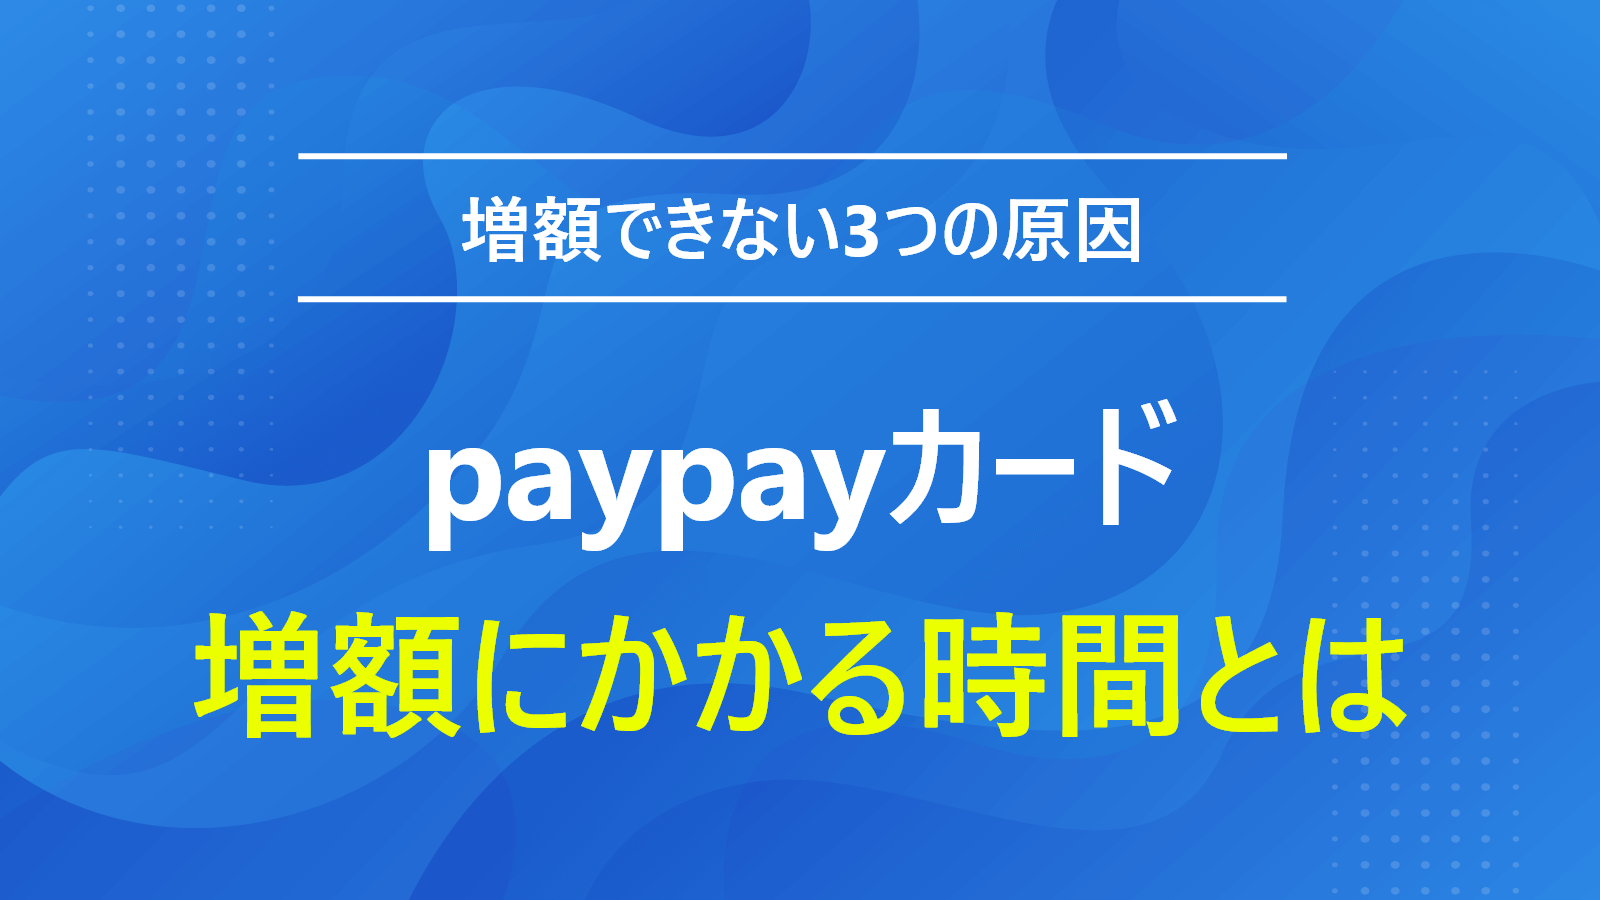 PayPayカード利用可能額の増額審査は厳しい？所要時間と3つのリスク